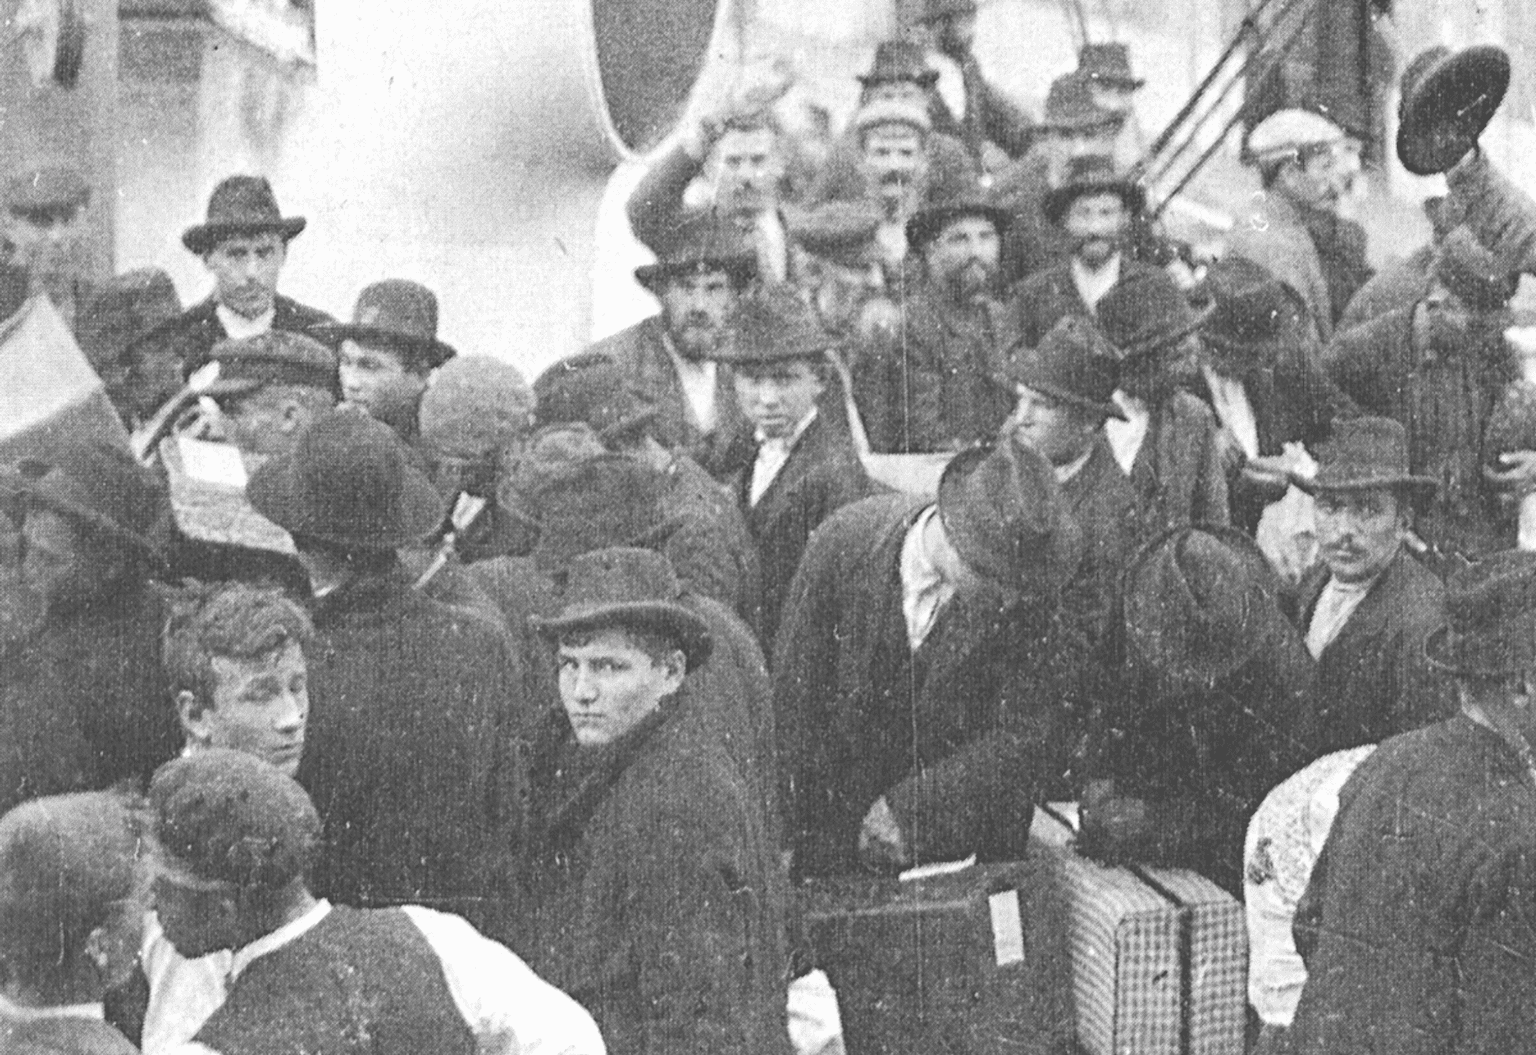 Sore Losers or Dangerous Terrorists? The Left-Wing Emigration in 1921